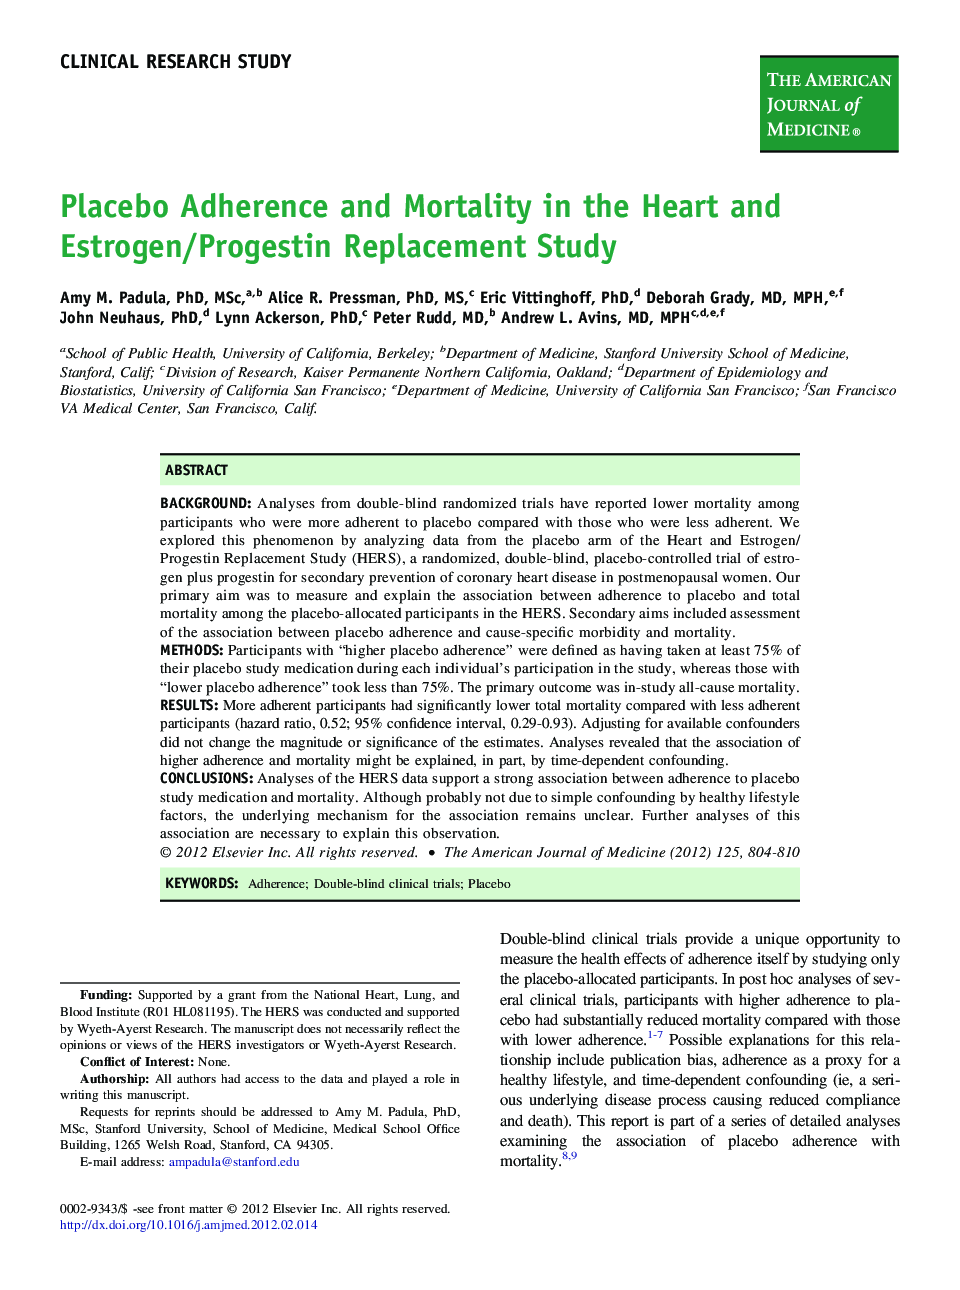 Placebo Adherence and Mortality in the Heart and Estrogen/Progestin Replacement Study 